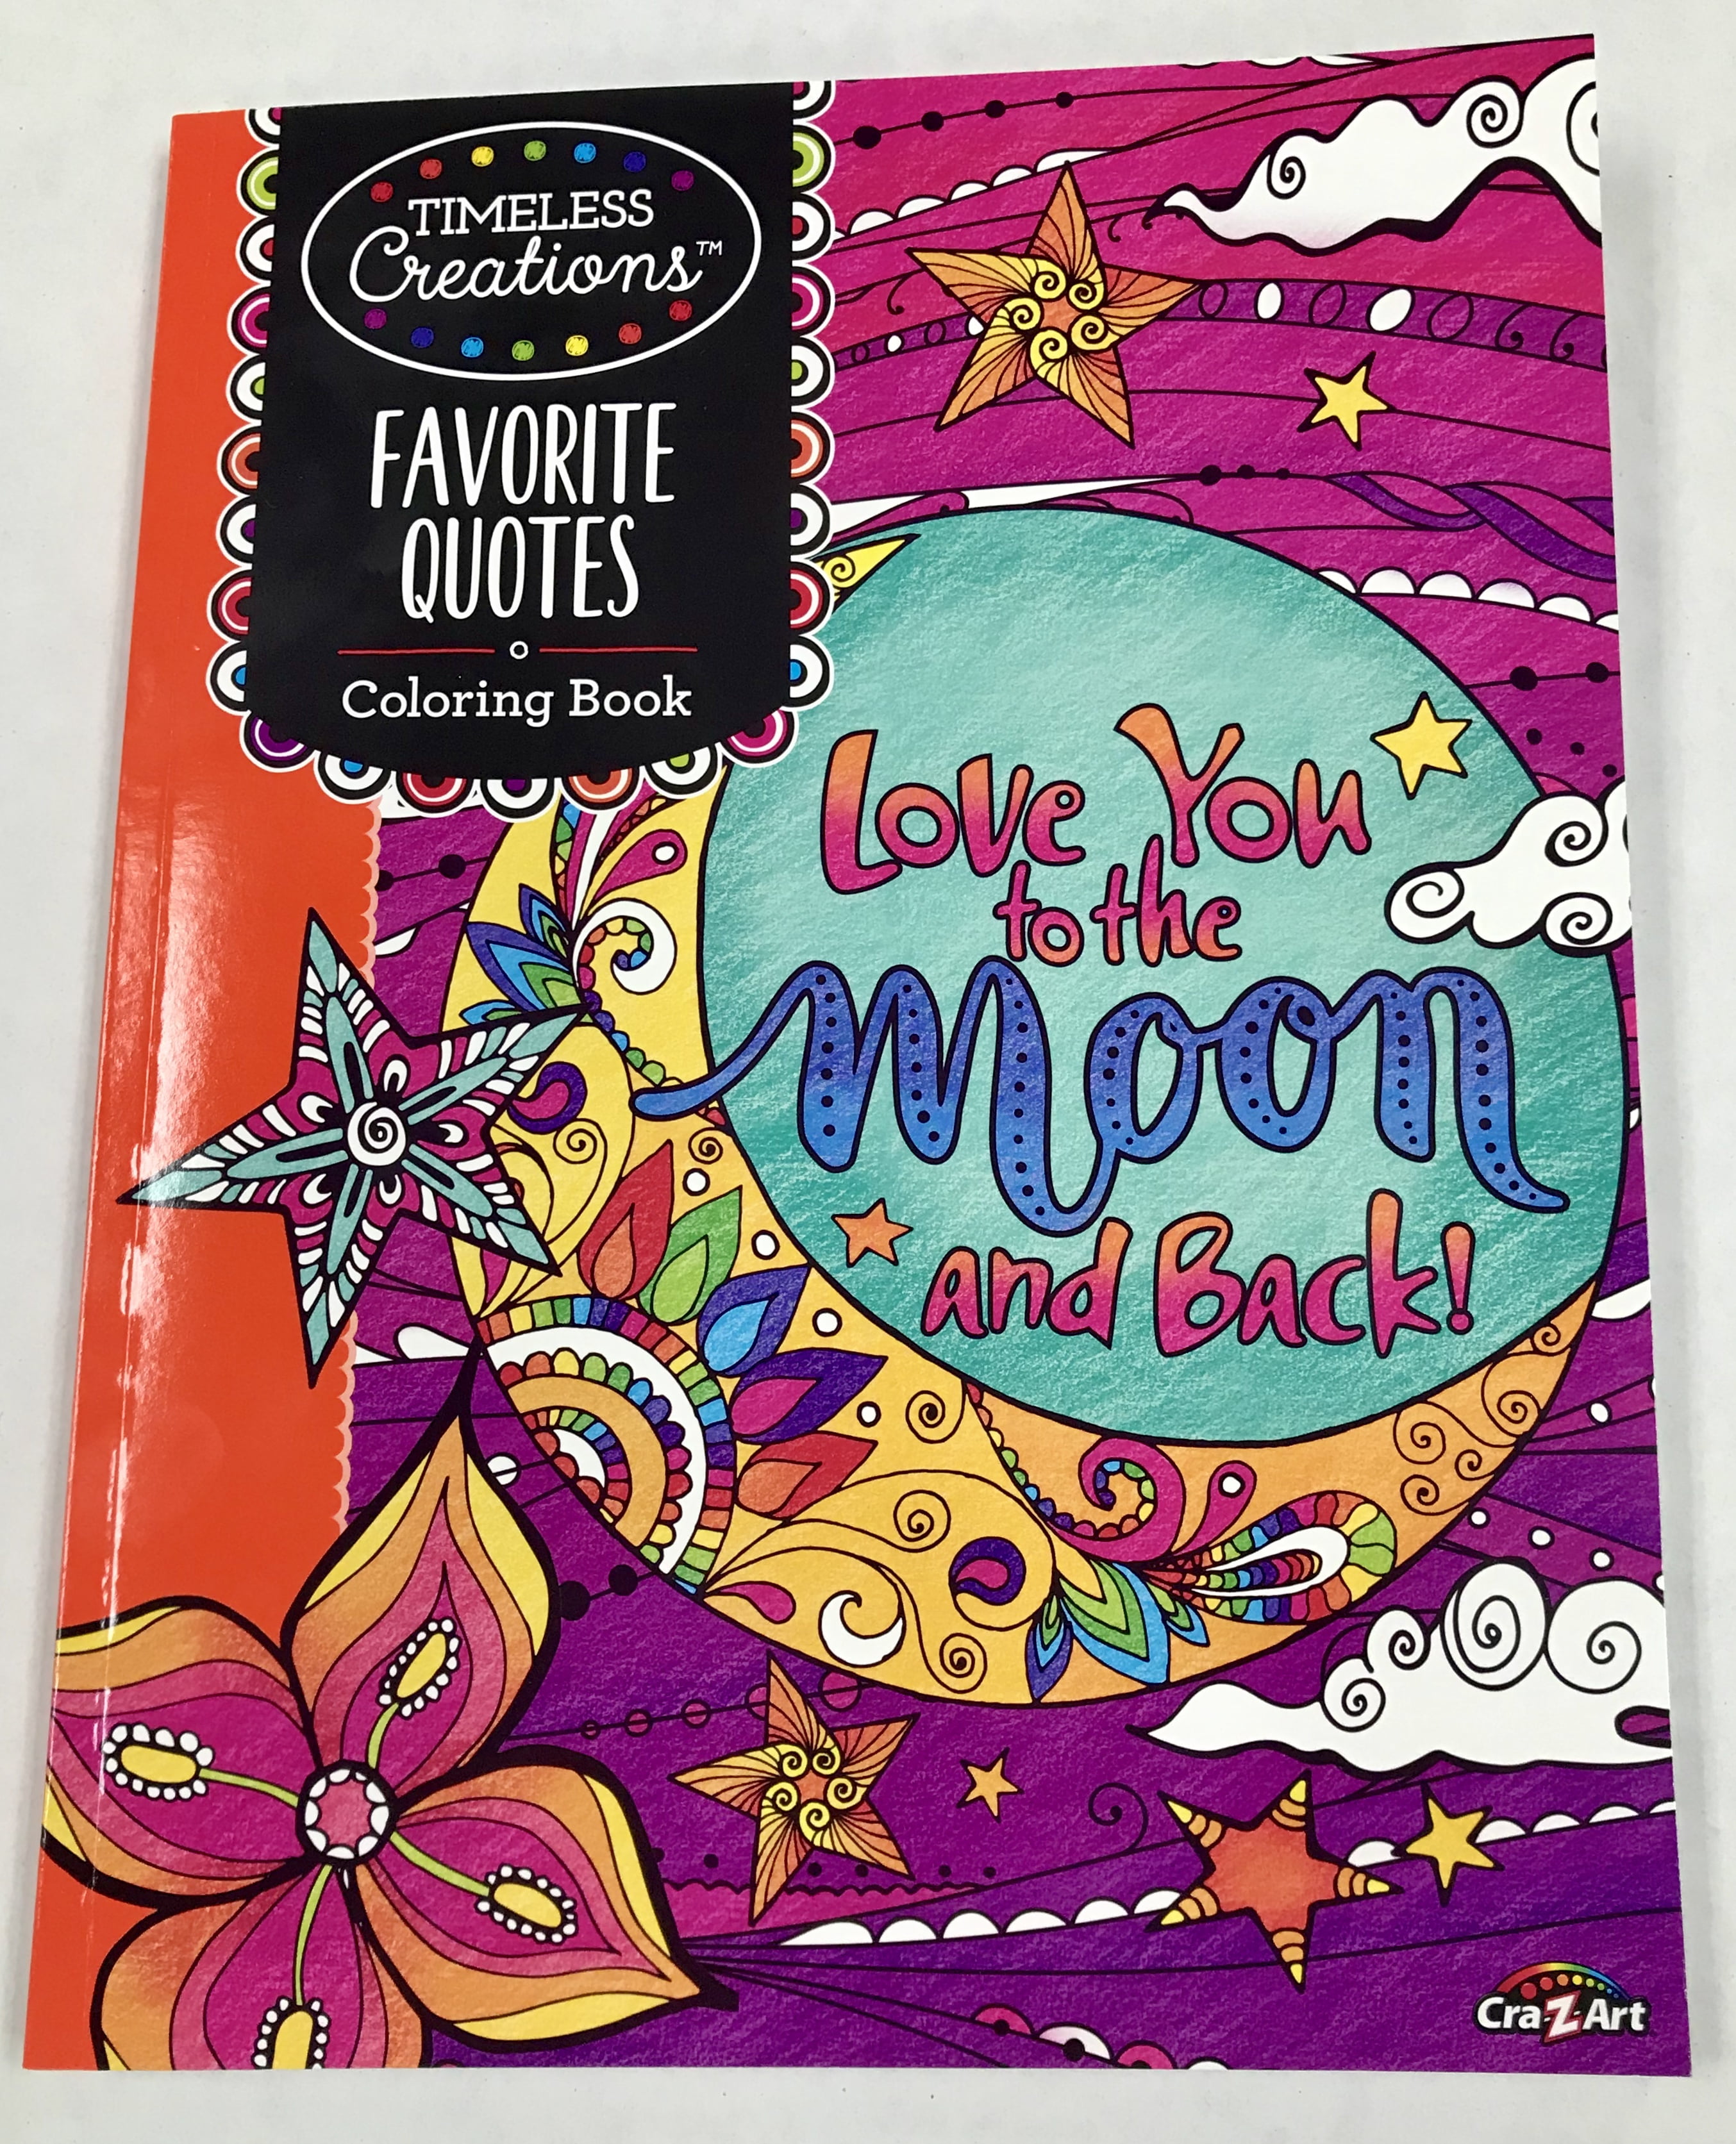 Cra-Z-Art Timeless Creations Coloring Book, Favorite Quotes - Walmart